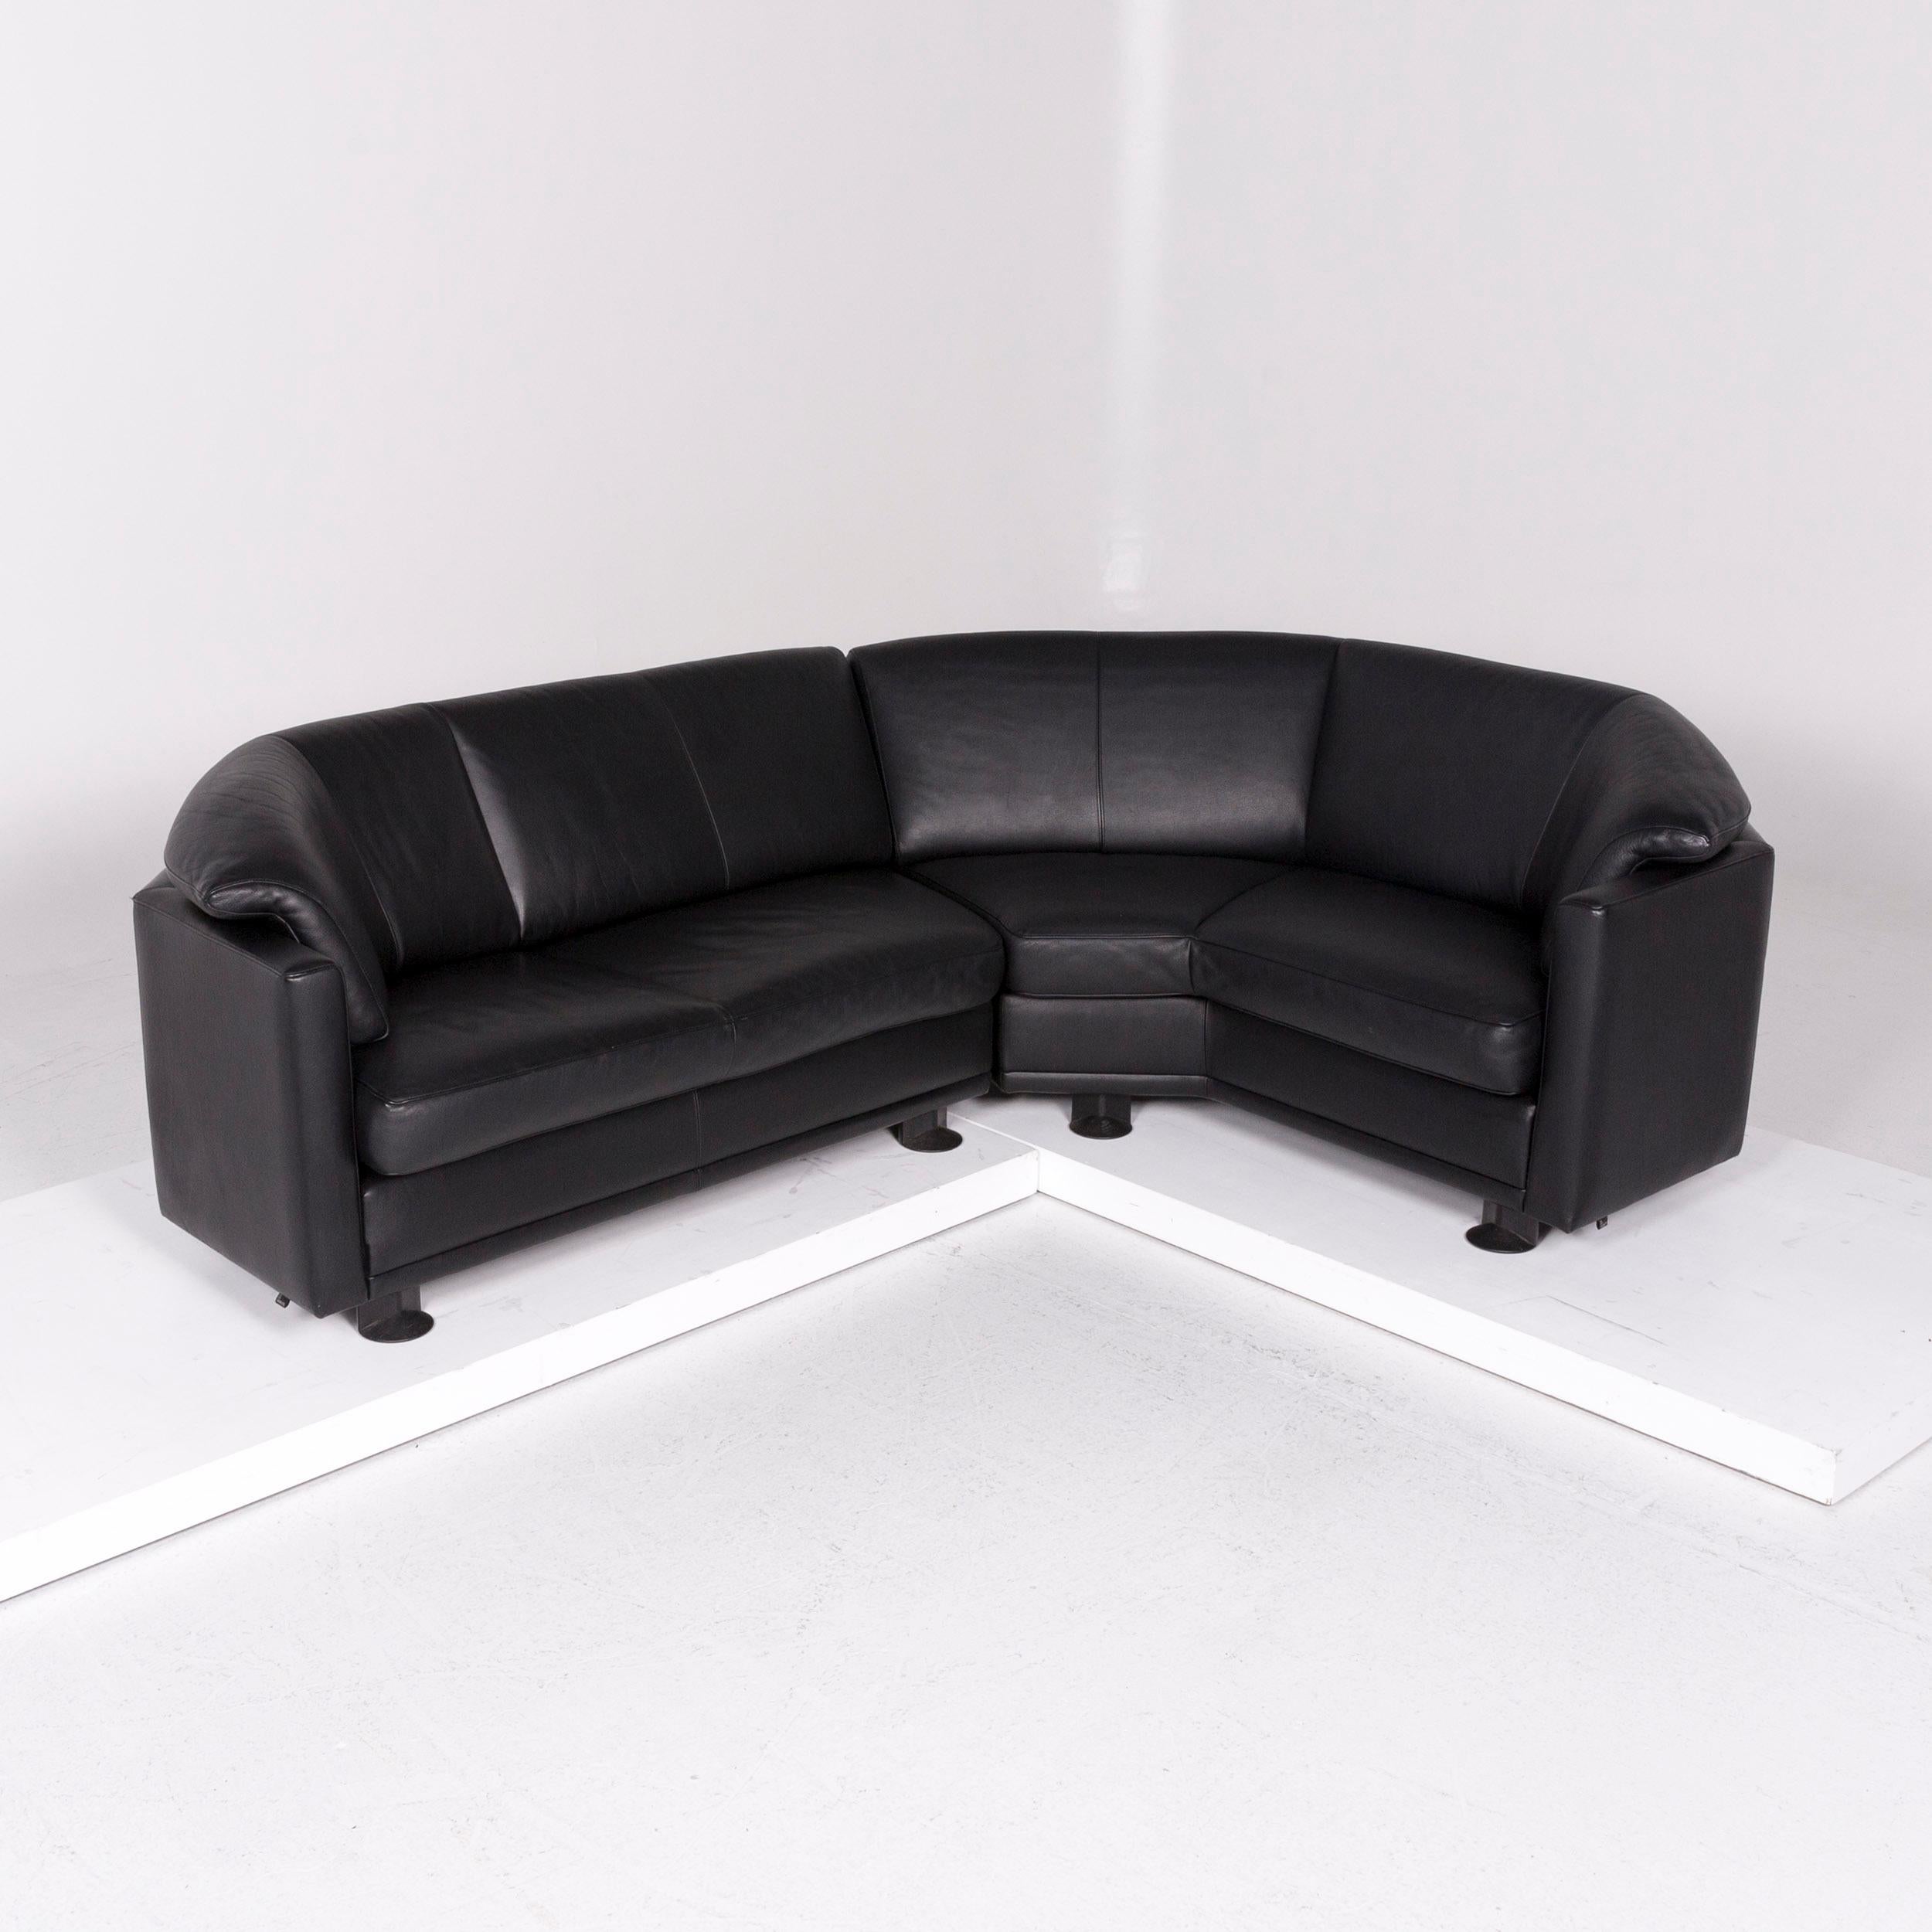 We bring to you a Leolux leather corner sofa black sofa couch.
 
 Product measurements in centimeters:
 
Depth 87
Width 245
Height 76
Seat-height 42
Rest-height 62
Seat-depth 50
Seat-width 138
Back-height 33.
  